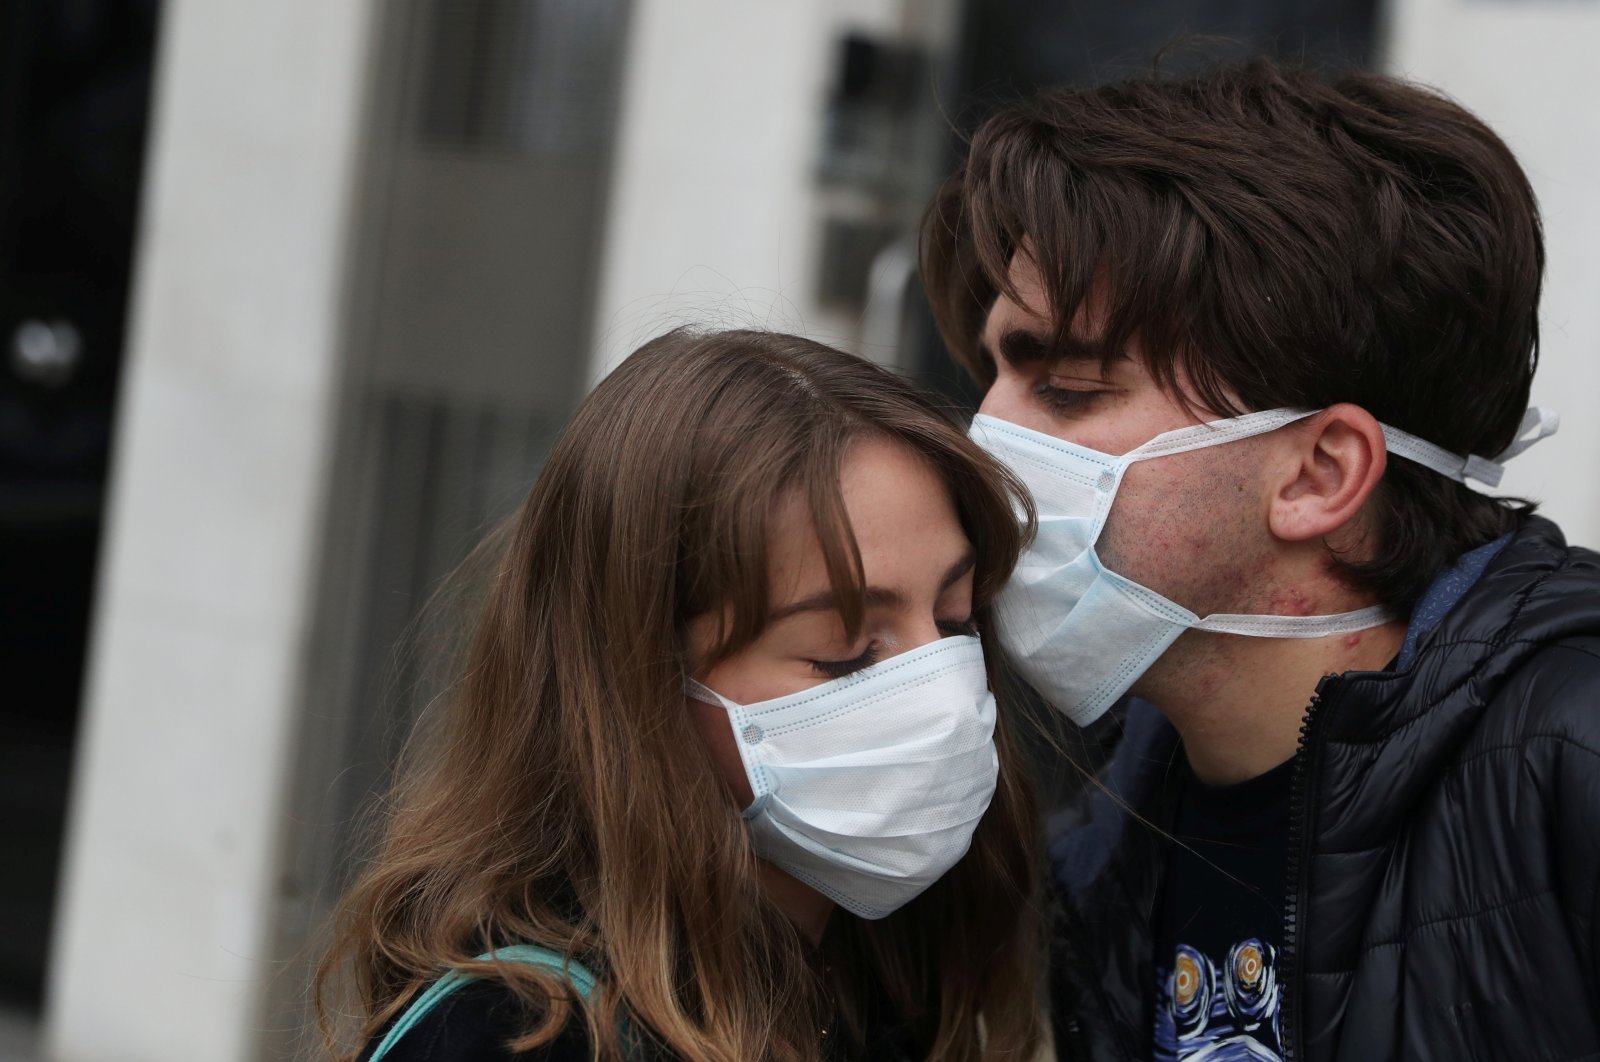 Marco Donoso del Bufalo, 20, a young man on the autism spectrum, kisses his sister Irene, 22, as they take their daily walk during the lockdown amid the coronavirus disease (COVID-19) outbreak in Madrid, Spain, April 9, 2020. (Reuters Photo)